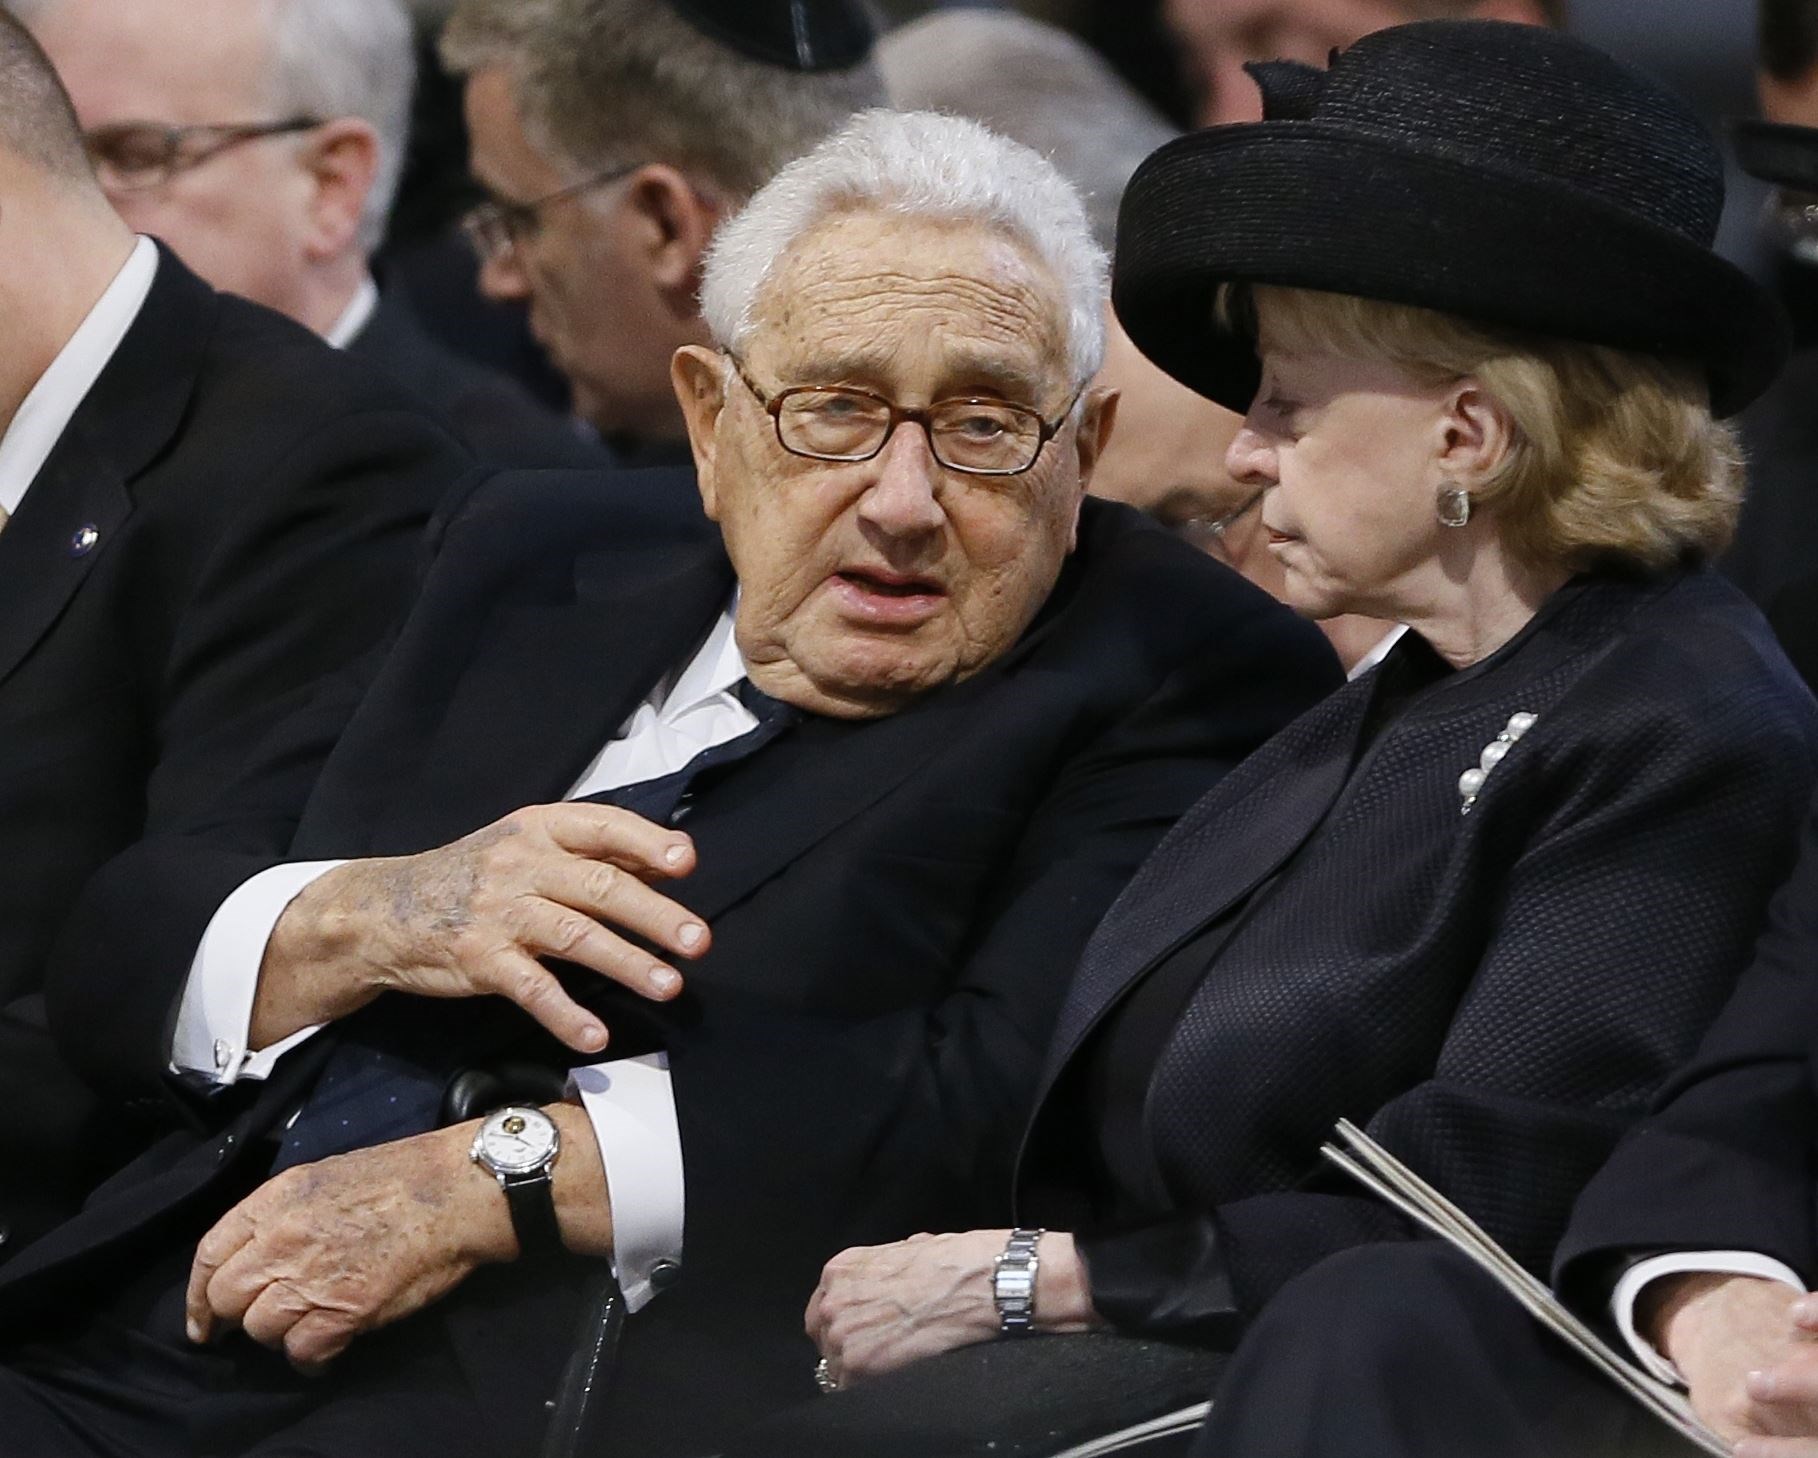 Mr Kissinger attended the funeral service of Lady Thatcher in London (Kirsty Wigglesworth/PA)